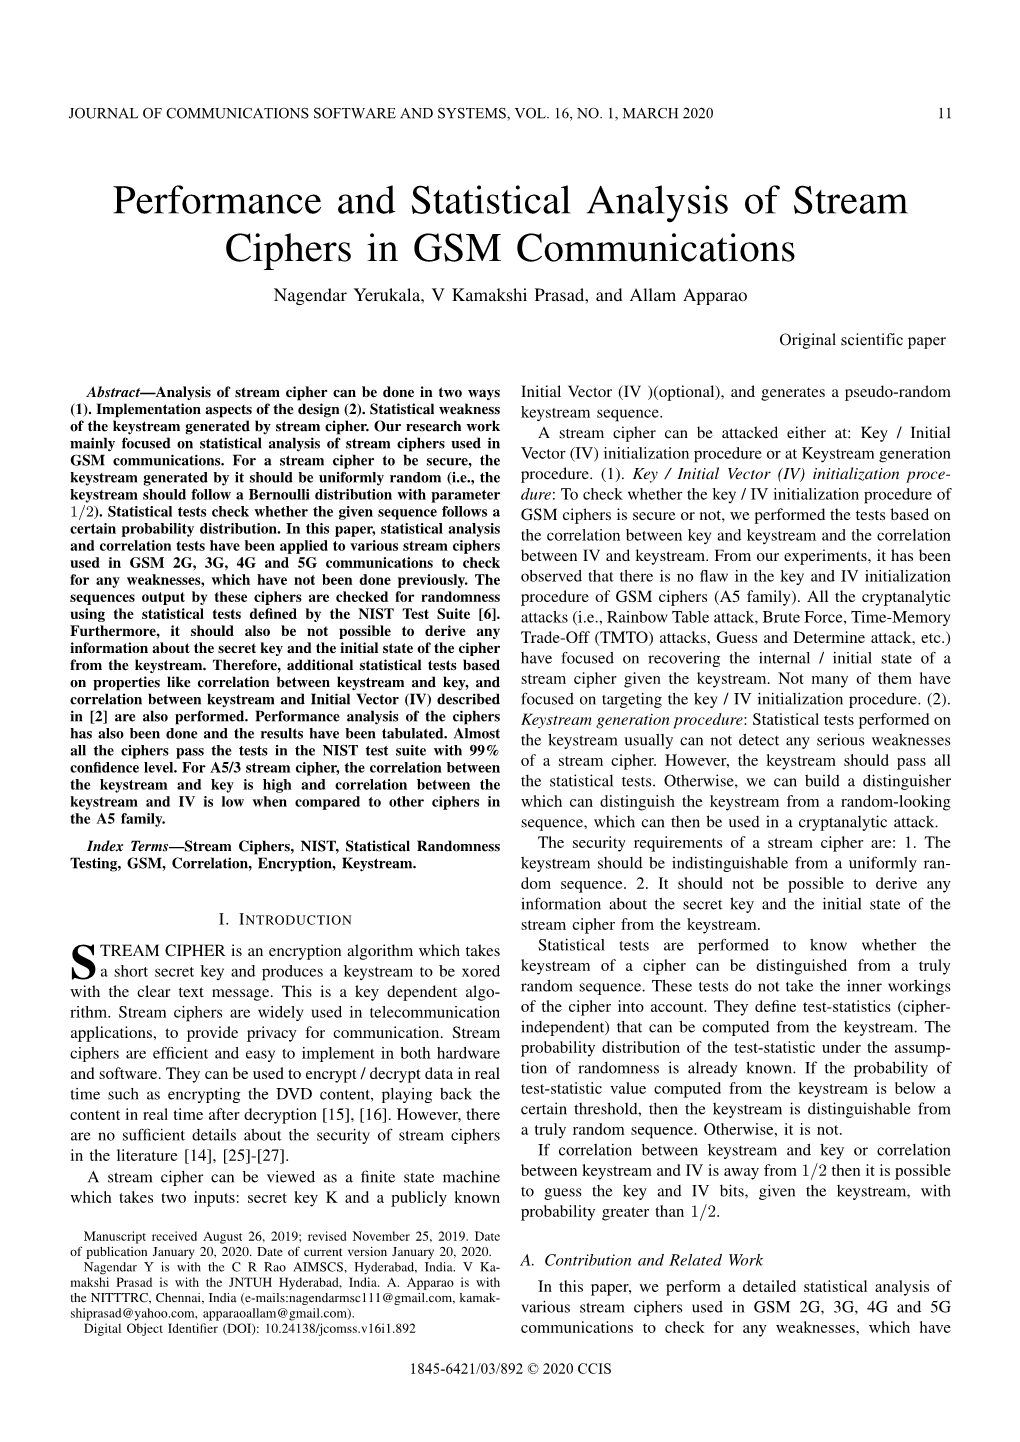 Performance and Statistical Analysis of Stream Ciphers in GSM Communications Nagendar Yerukala, V Kamakshi Prasad, and Allam Apparao